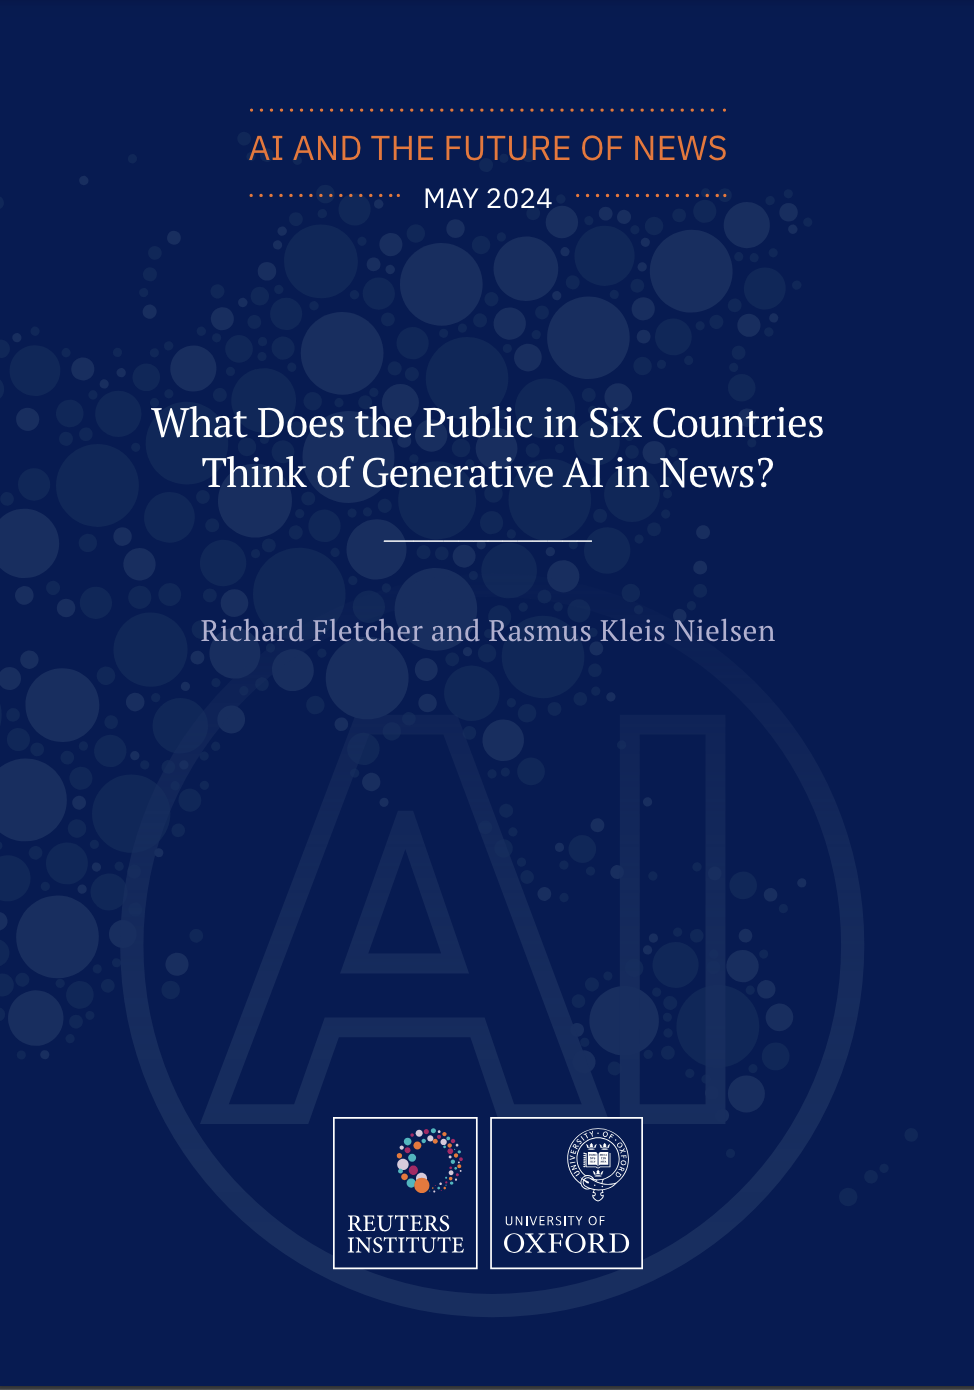 Cover of the Reuters Institute report "What does the public in six countries think of generative AI in news?"